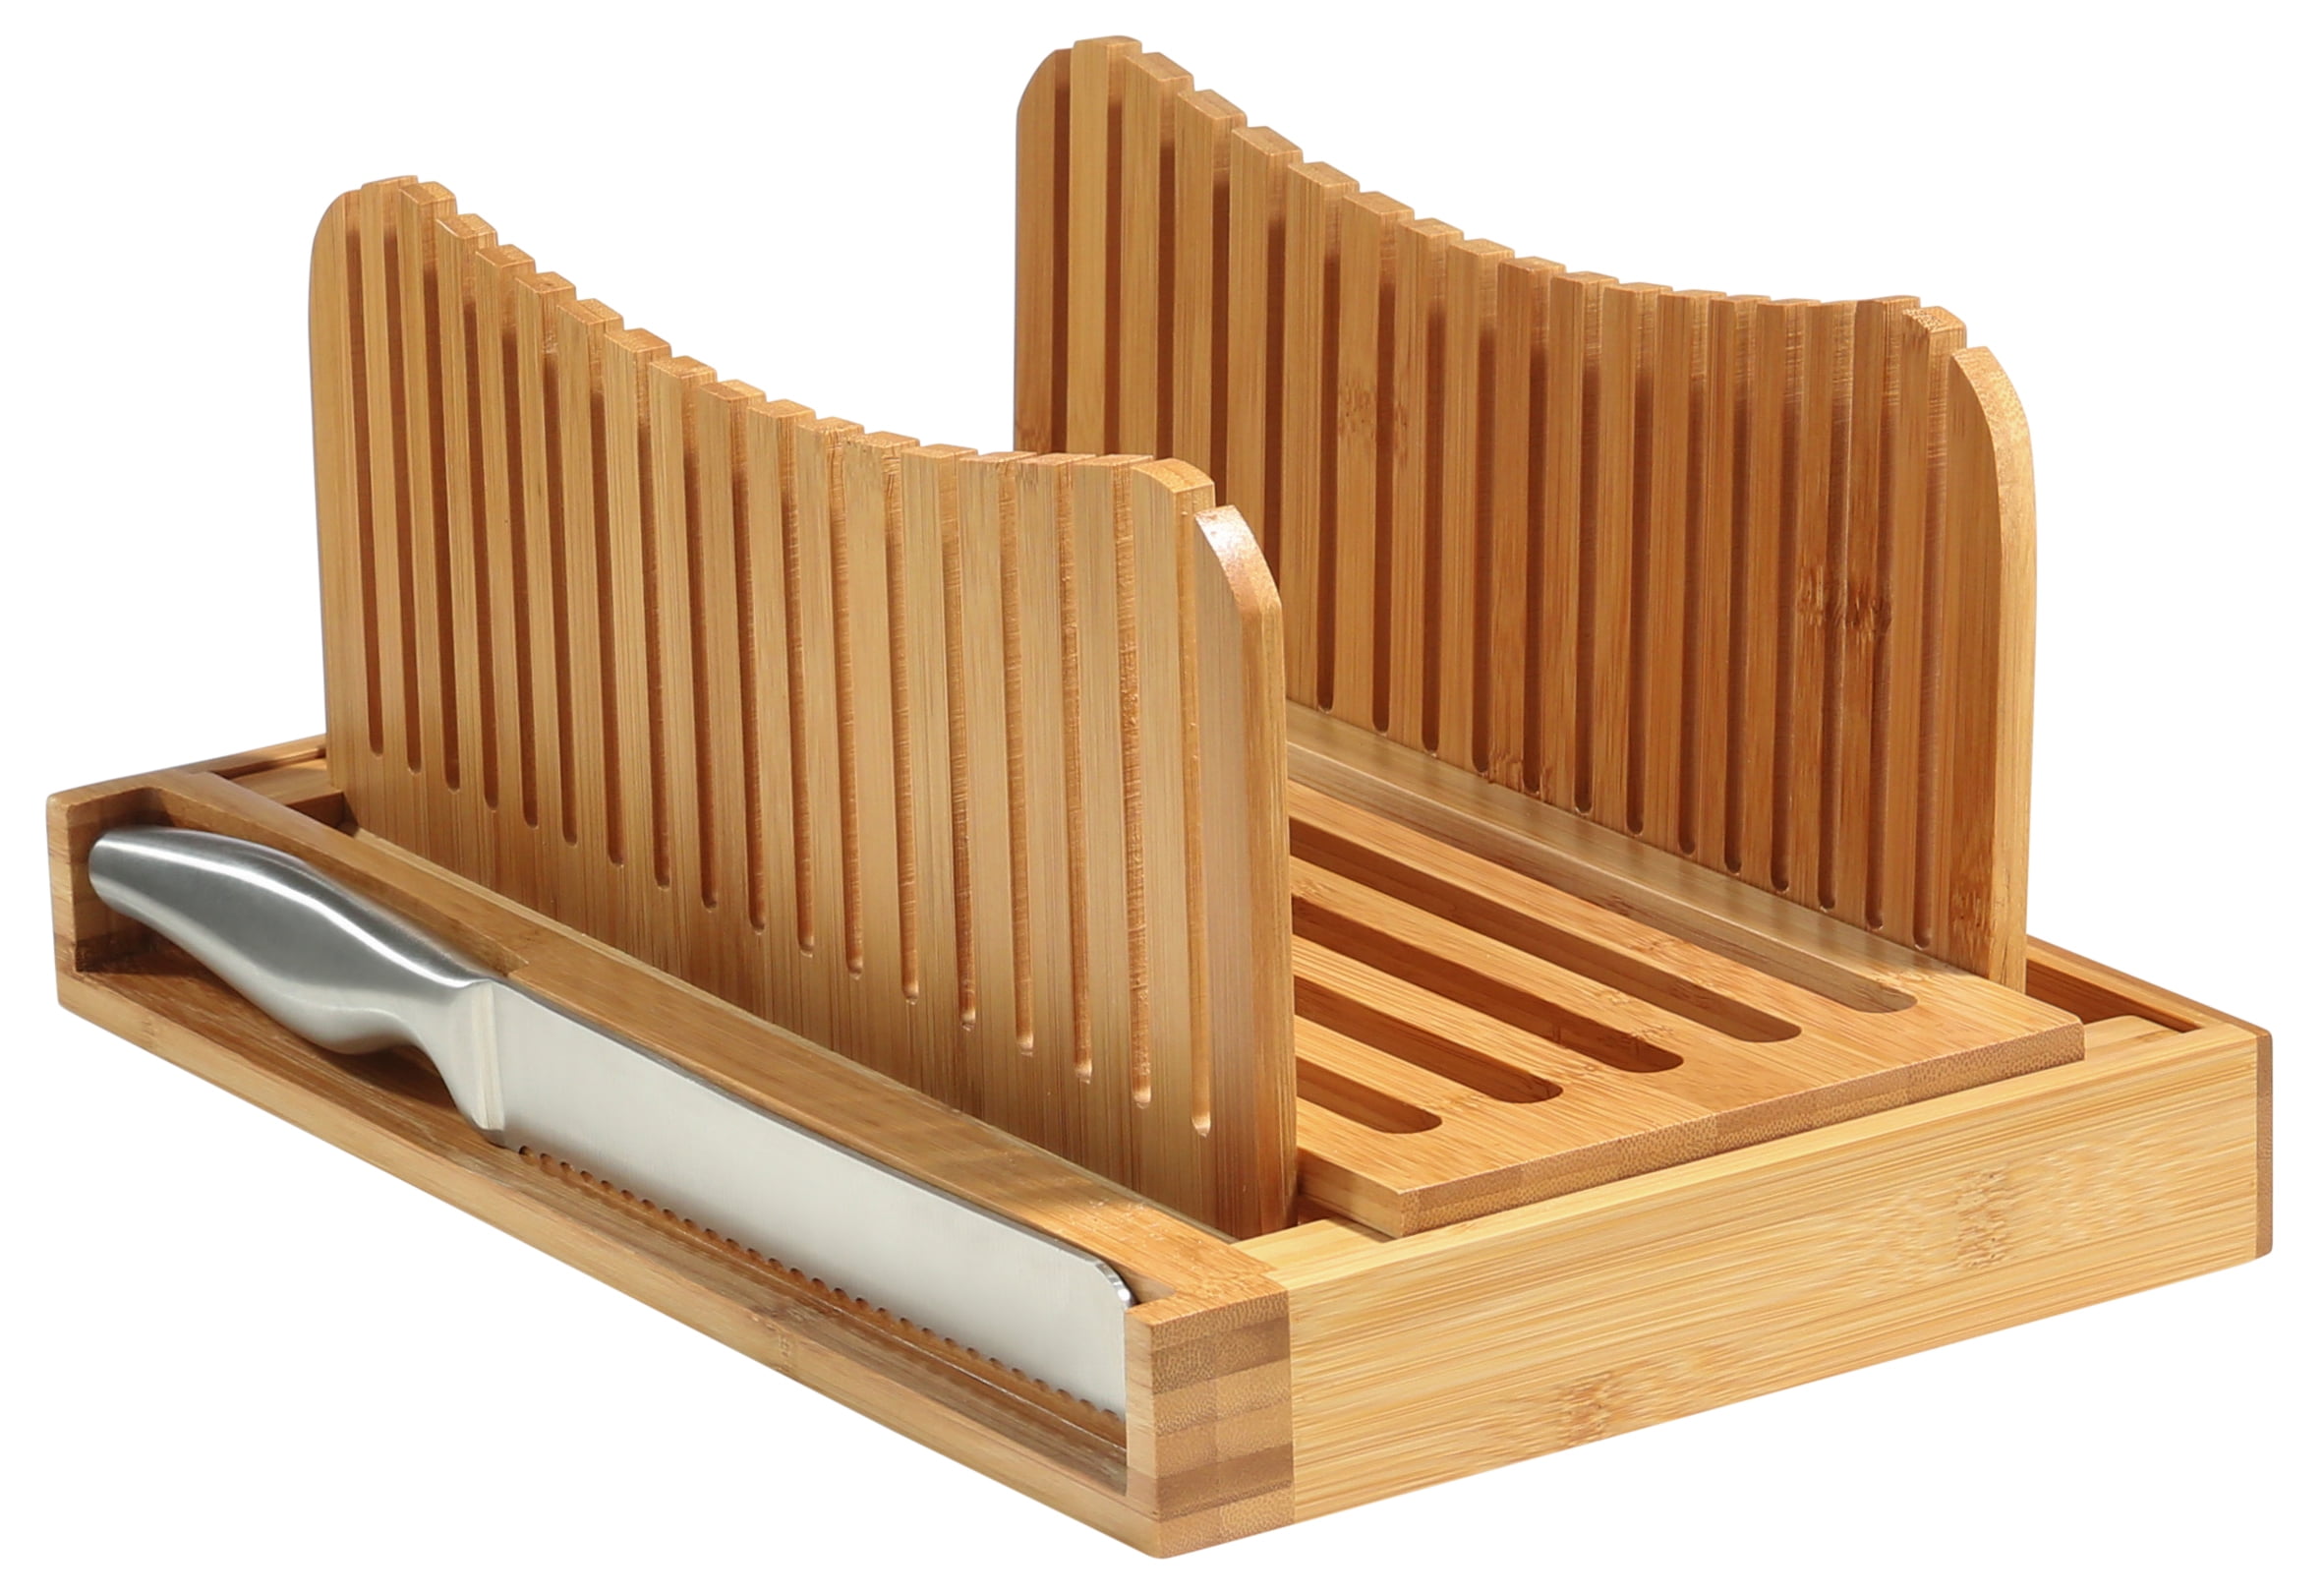 ANHAN RNAB077TK2H2B bambusi bread slicer cutting guide with knife - organic bamboo  bread cutter for homemade bread, loaf cakes, bagels - foldable a